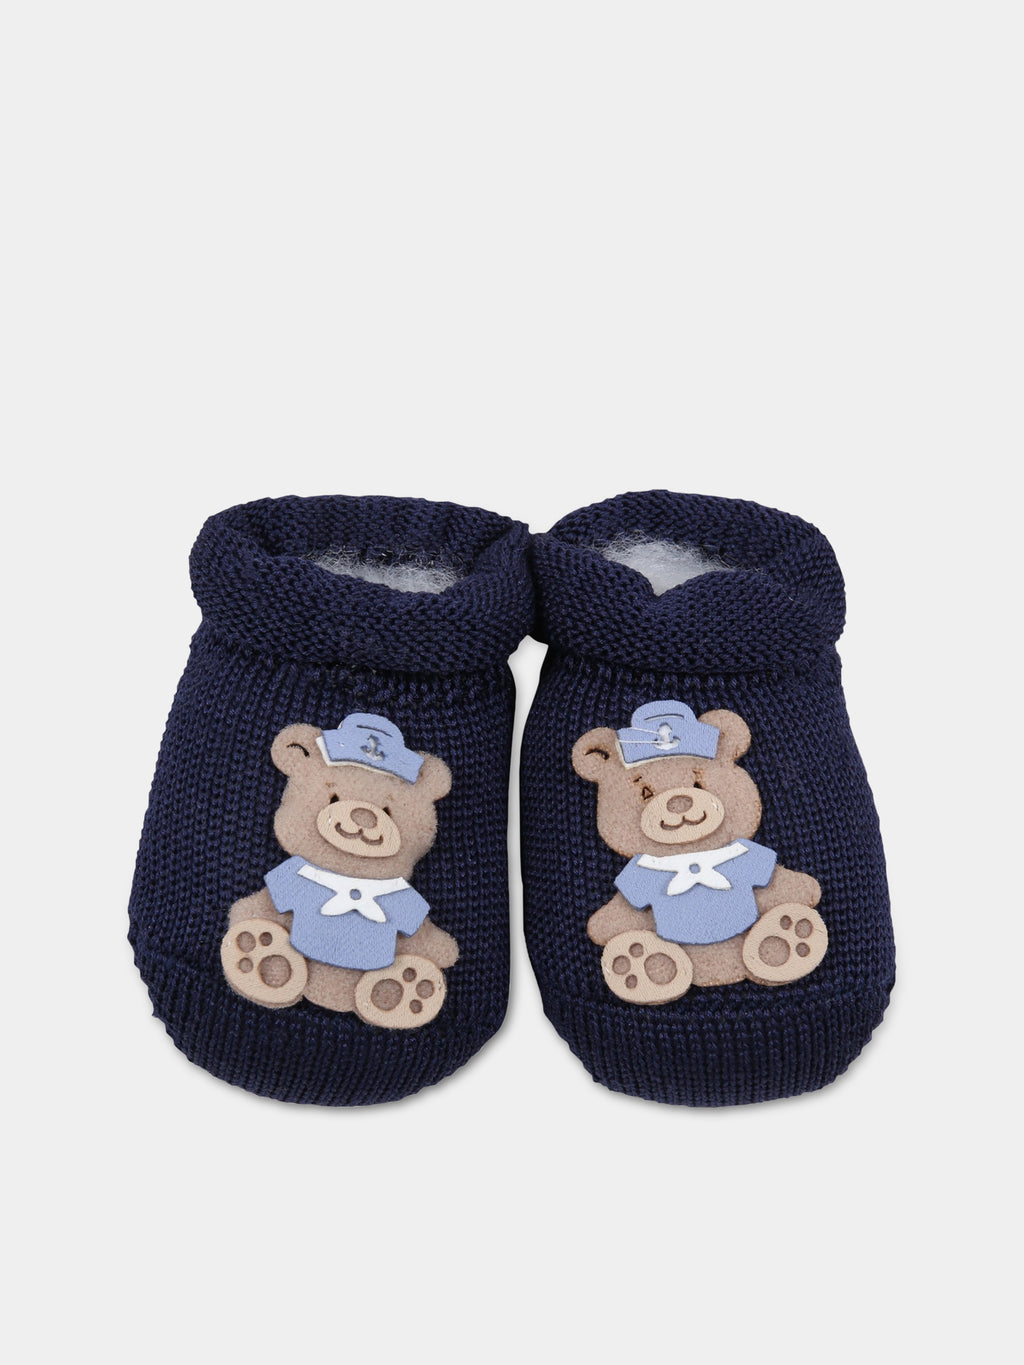 Blue slippers for baby boy